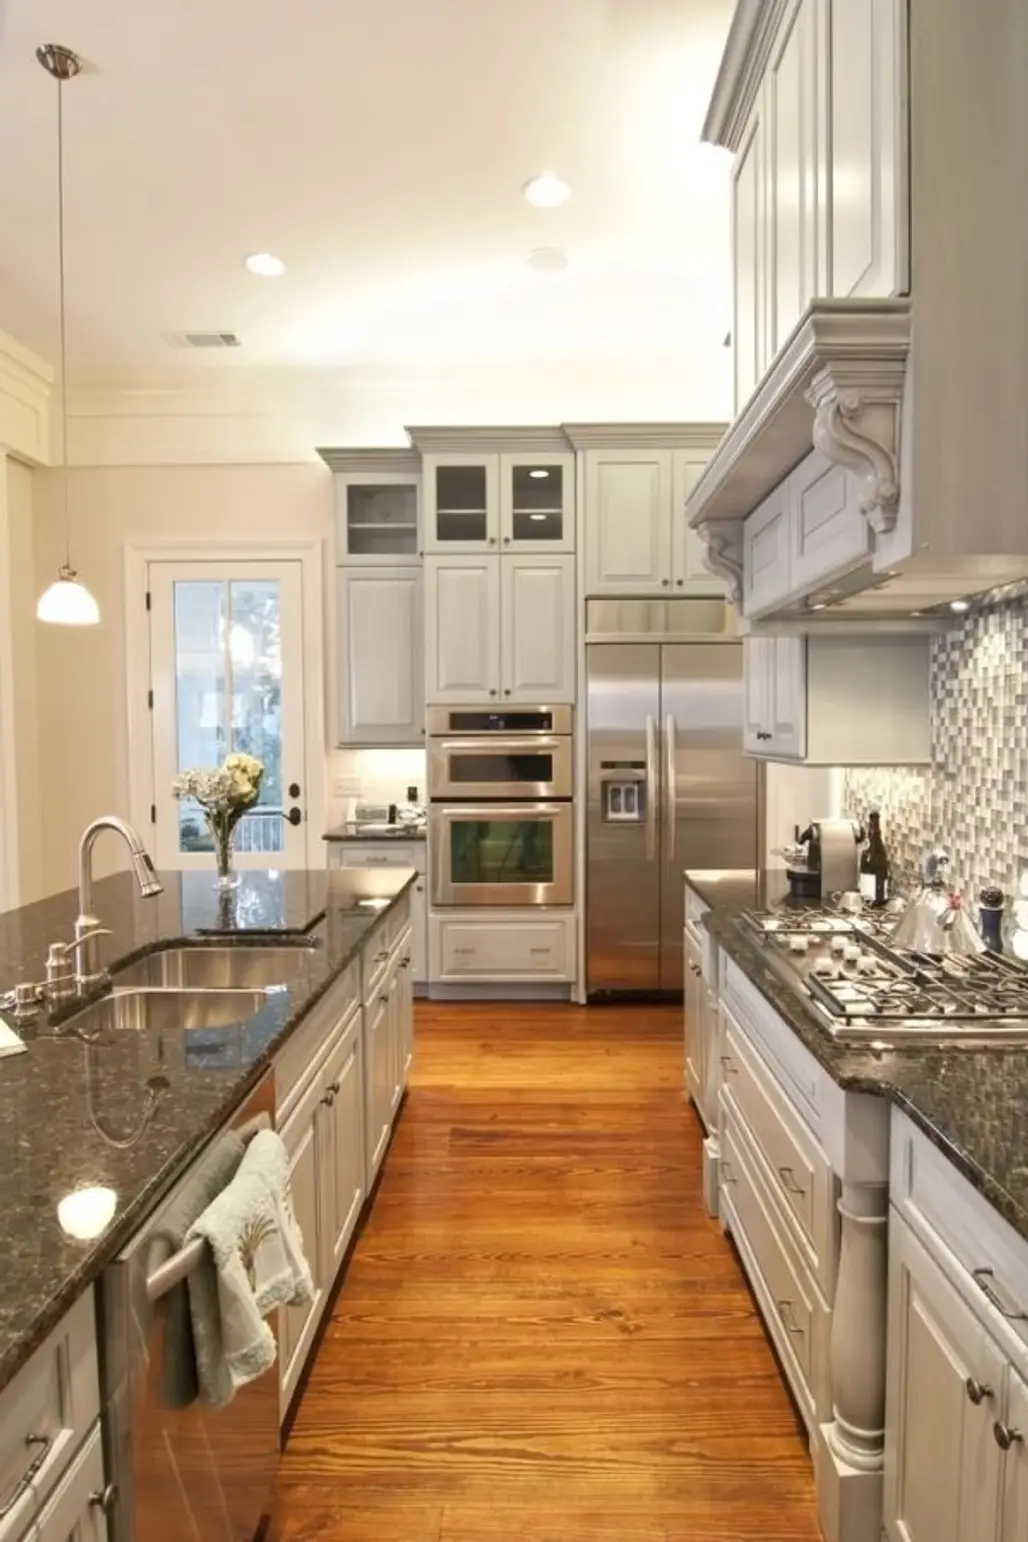 kitchen,room,property,countertop,cabinetry,